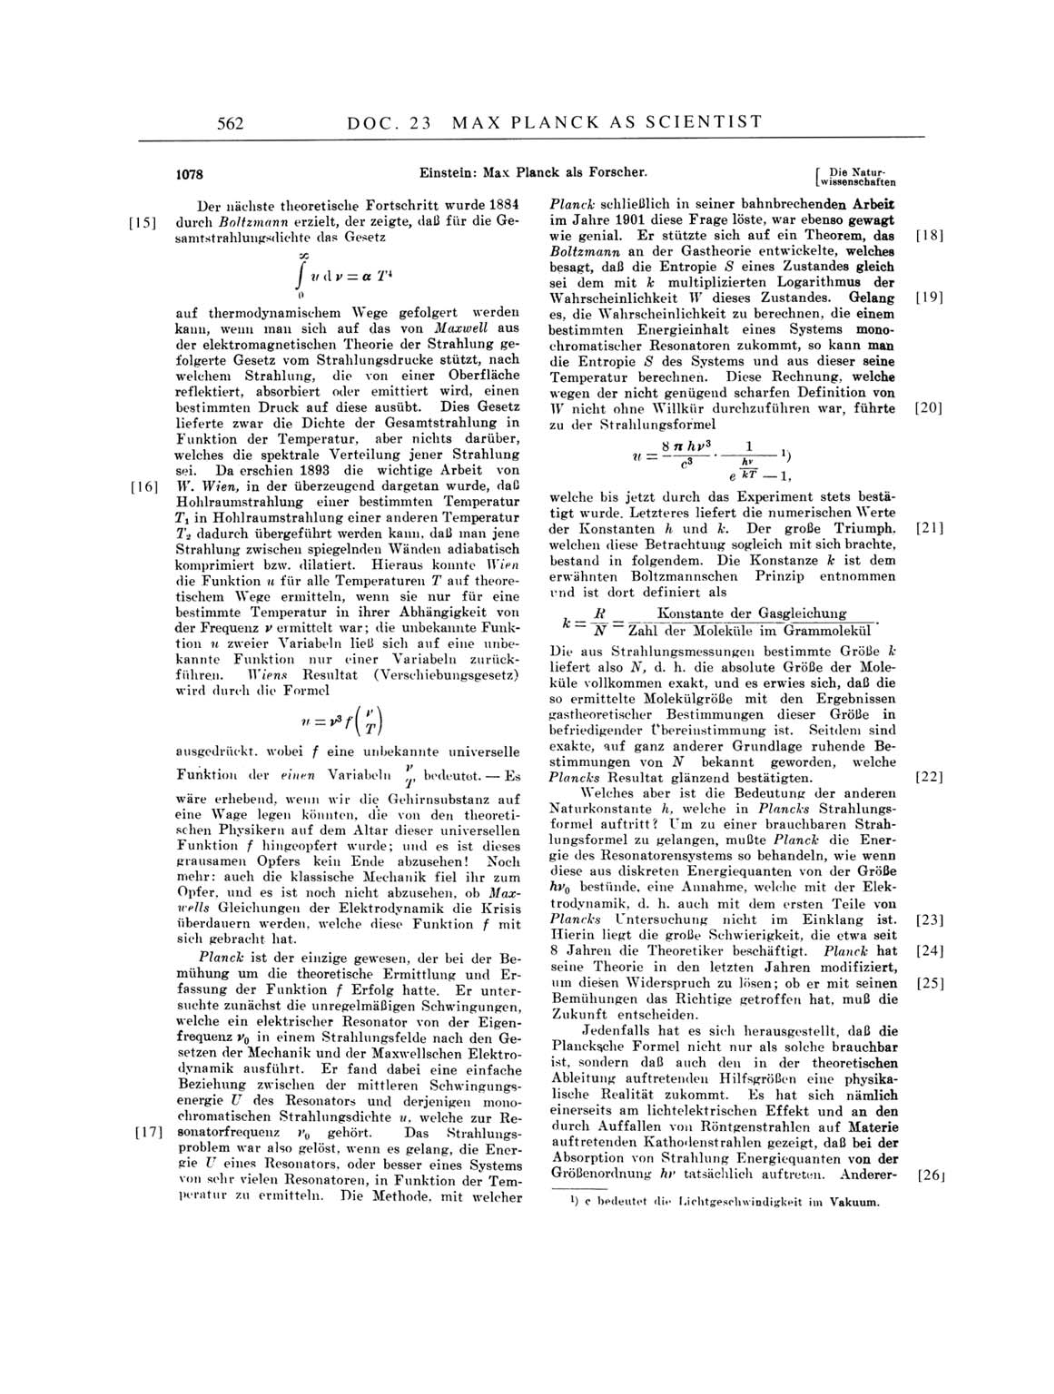 Volume 4: The Swiss Years: Writings 1912-1914 page 562